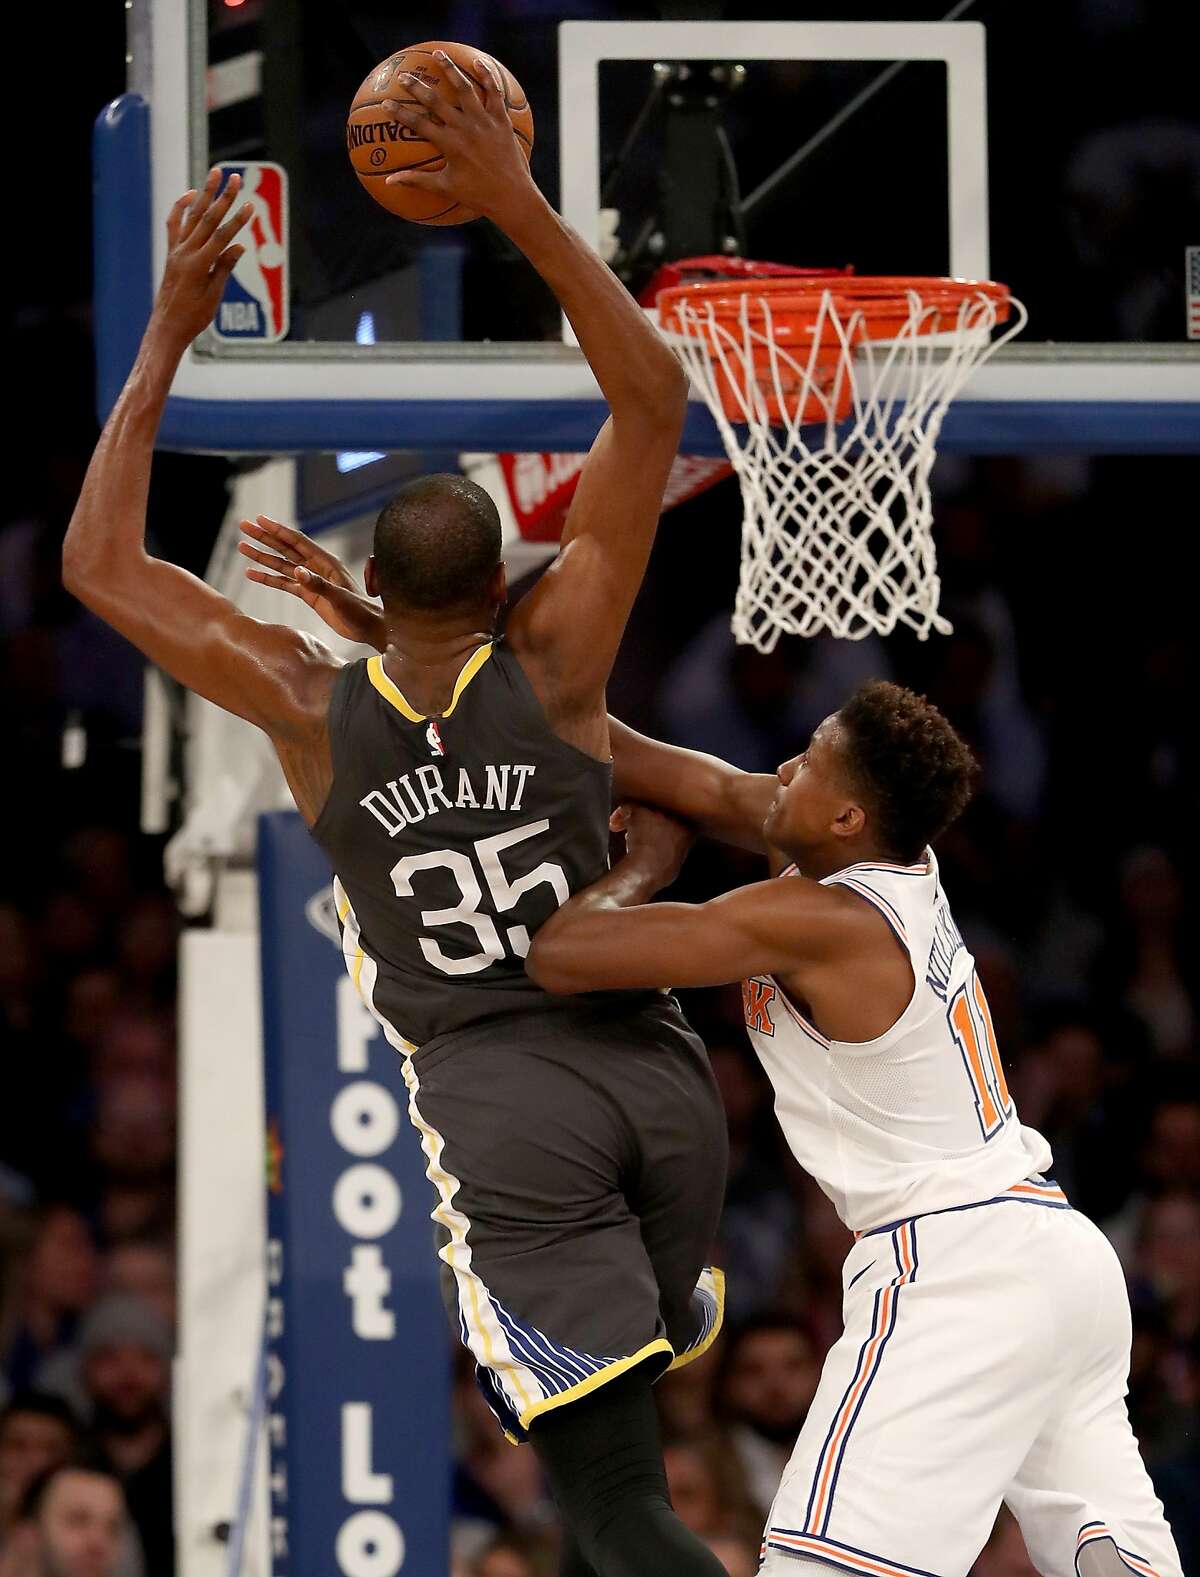 NEW YORK, NY - FEBRUARY 26: Kevin Durant #35 of the Golden State Warriors is fouled by Frank Ntilikina #11 of the New York Knicks at Madison Square Garden on February 26, 2018 in New York City. NOTE TO USER: User expressly acknowledges and agrees that, by downloading and or using this Photograph, user is consenting to the terms and conditions of the Getty Images License Agreement (Photo by Elsa/Getty Images)